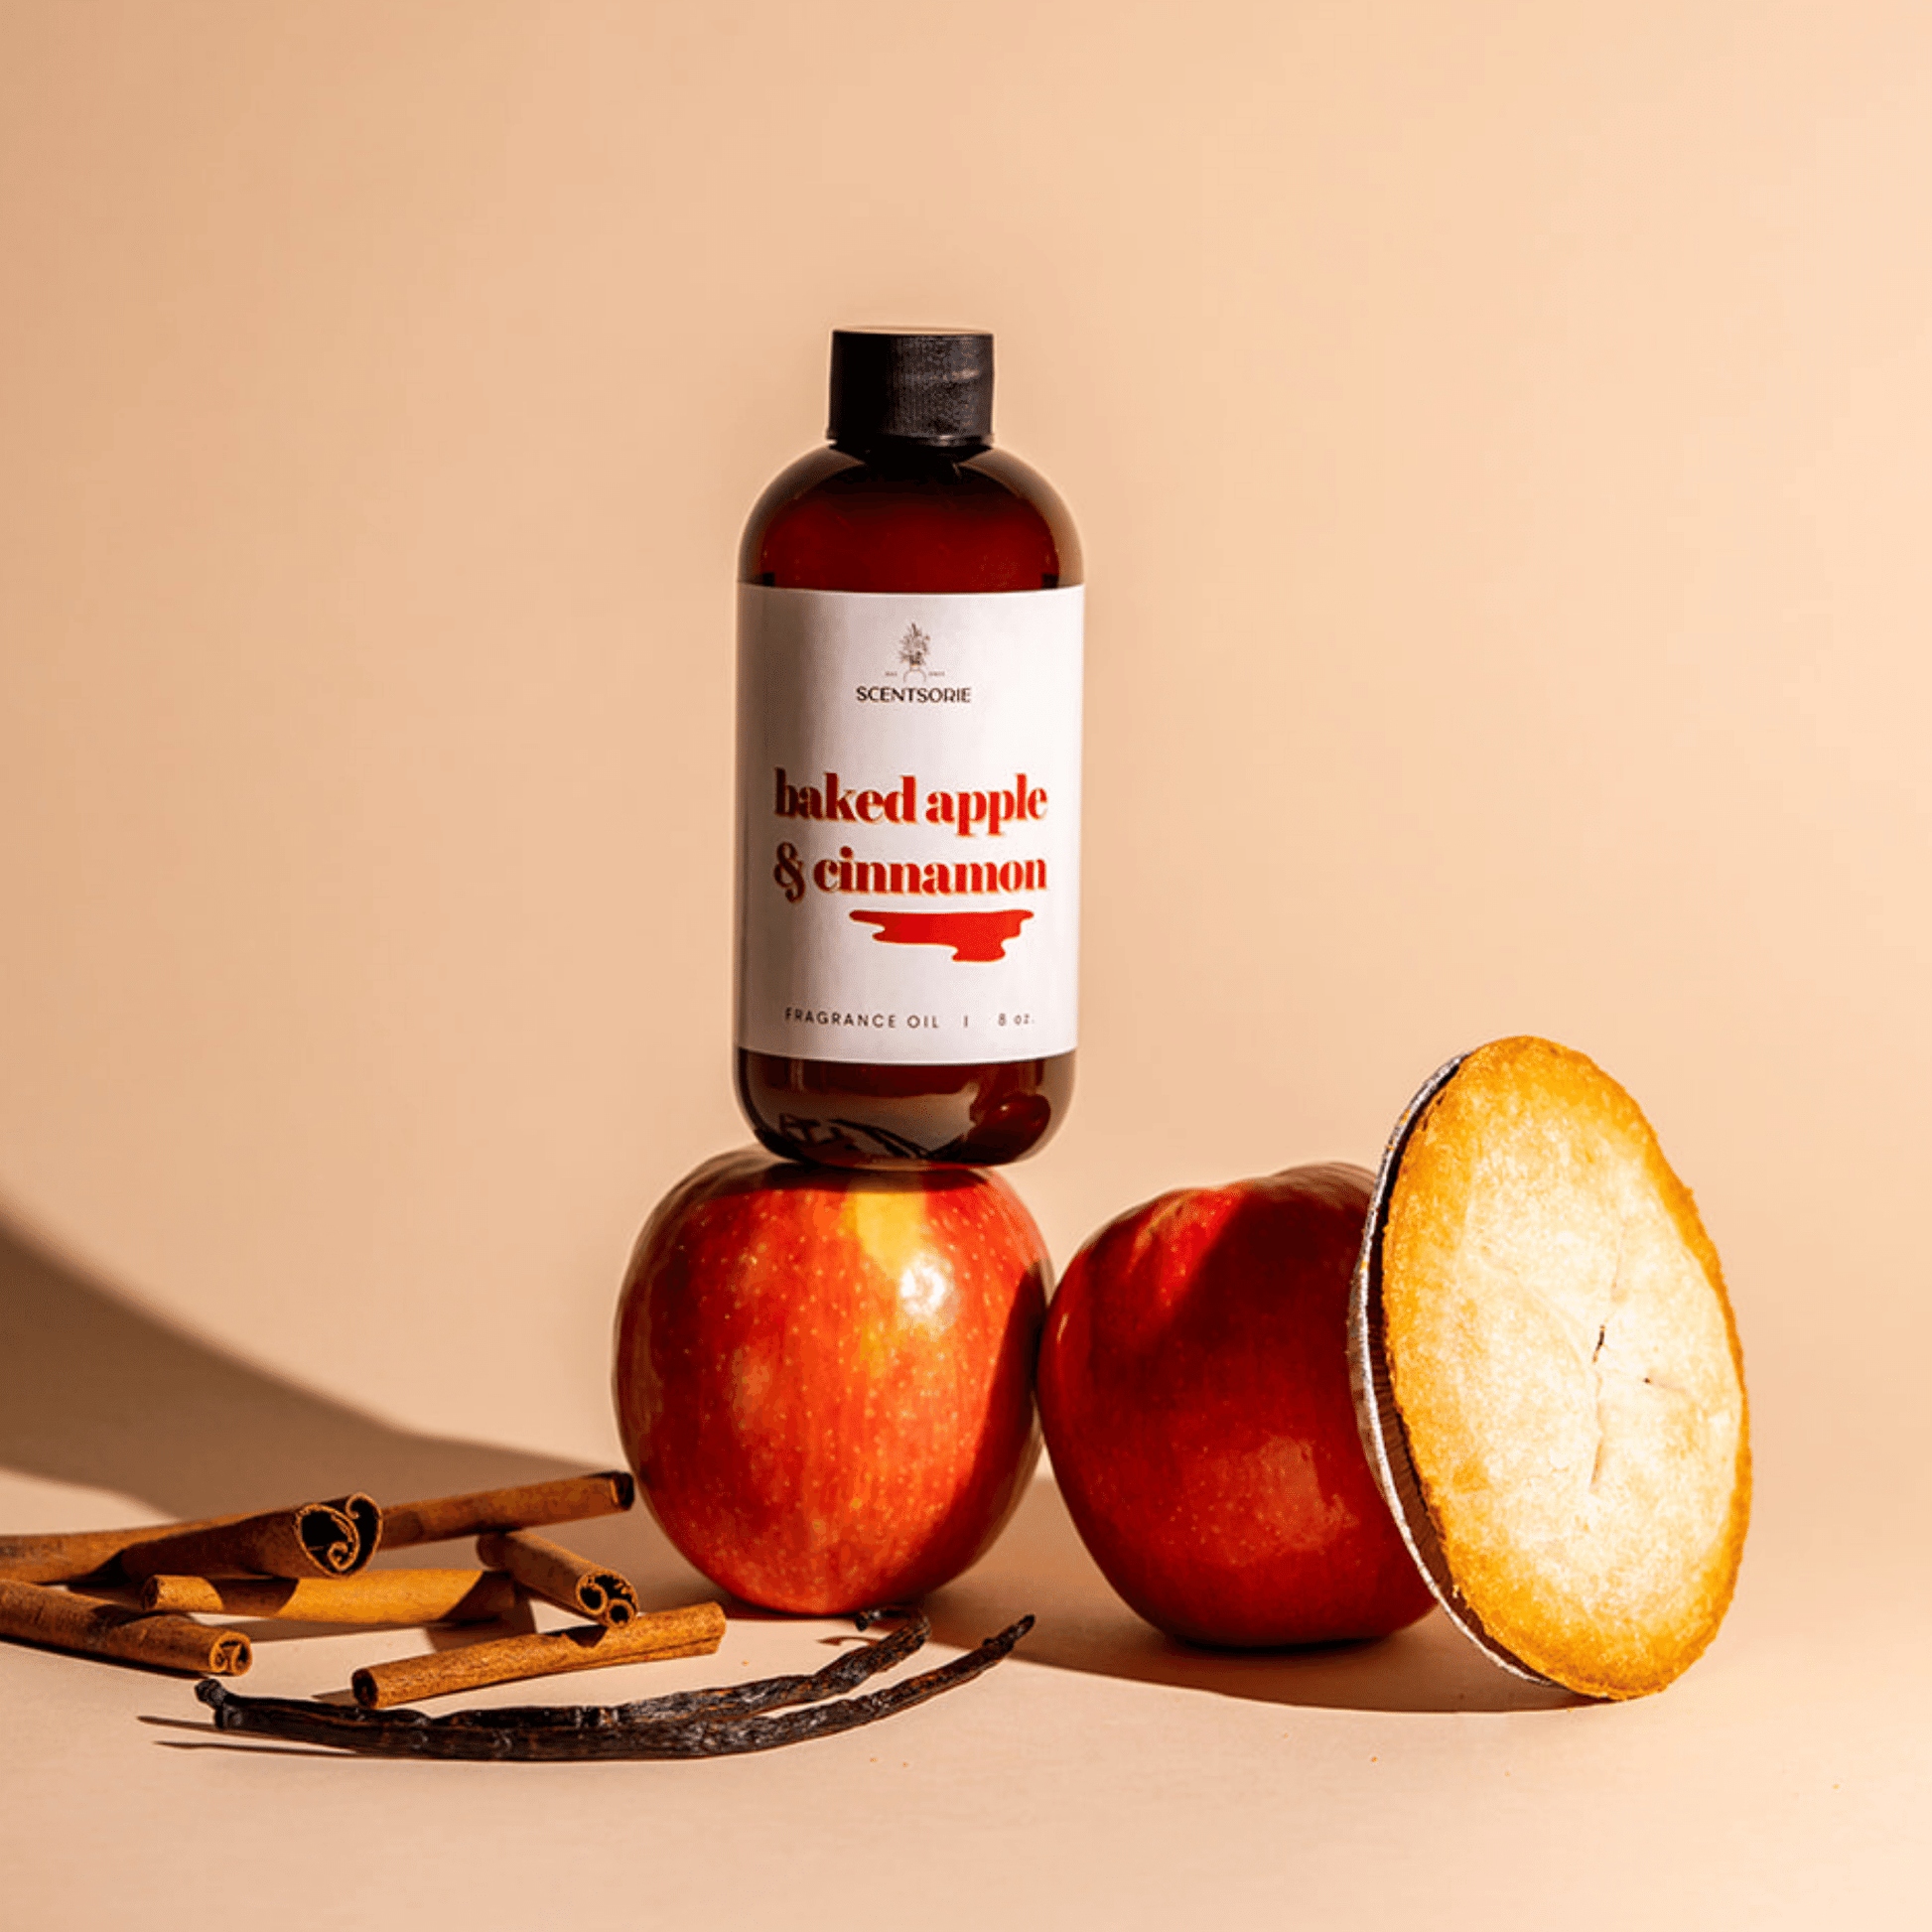 Baked Apple Cinnamon fragrance oil for candle soap making